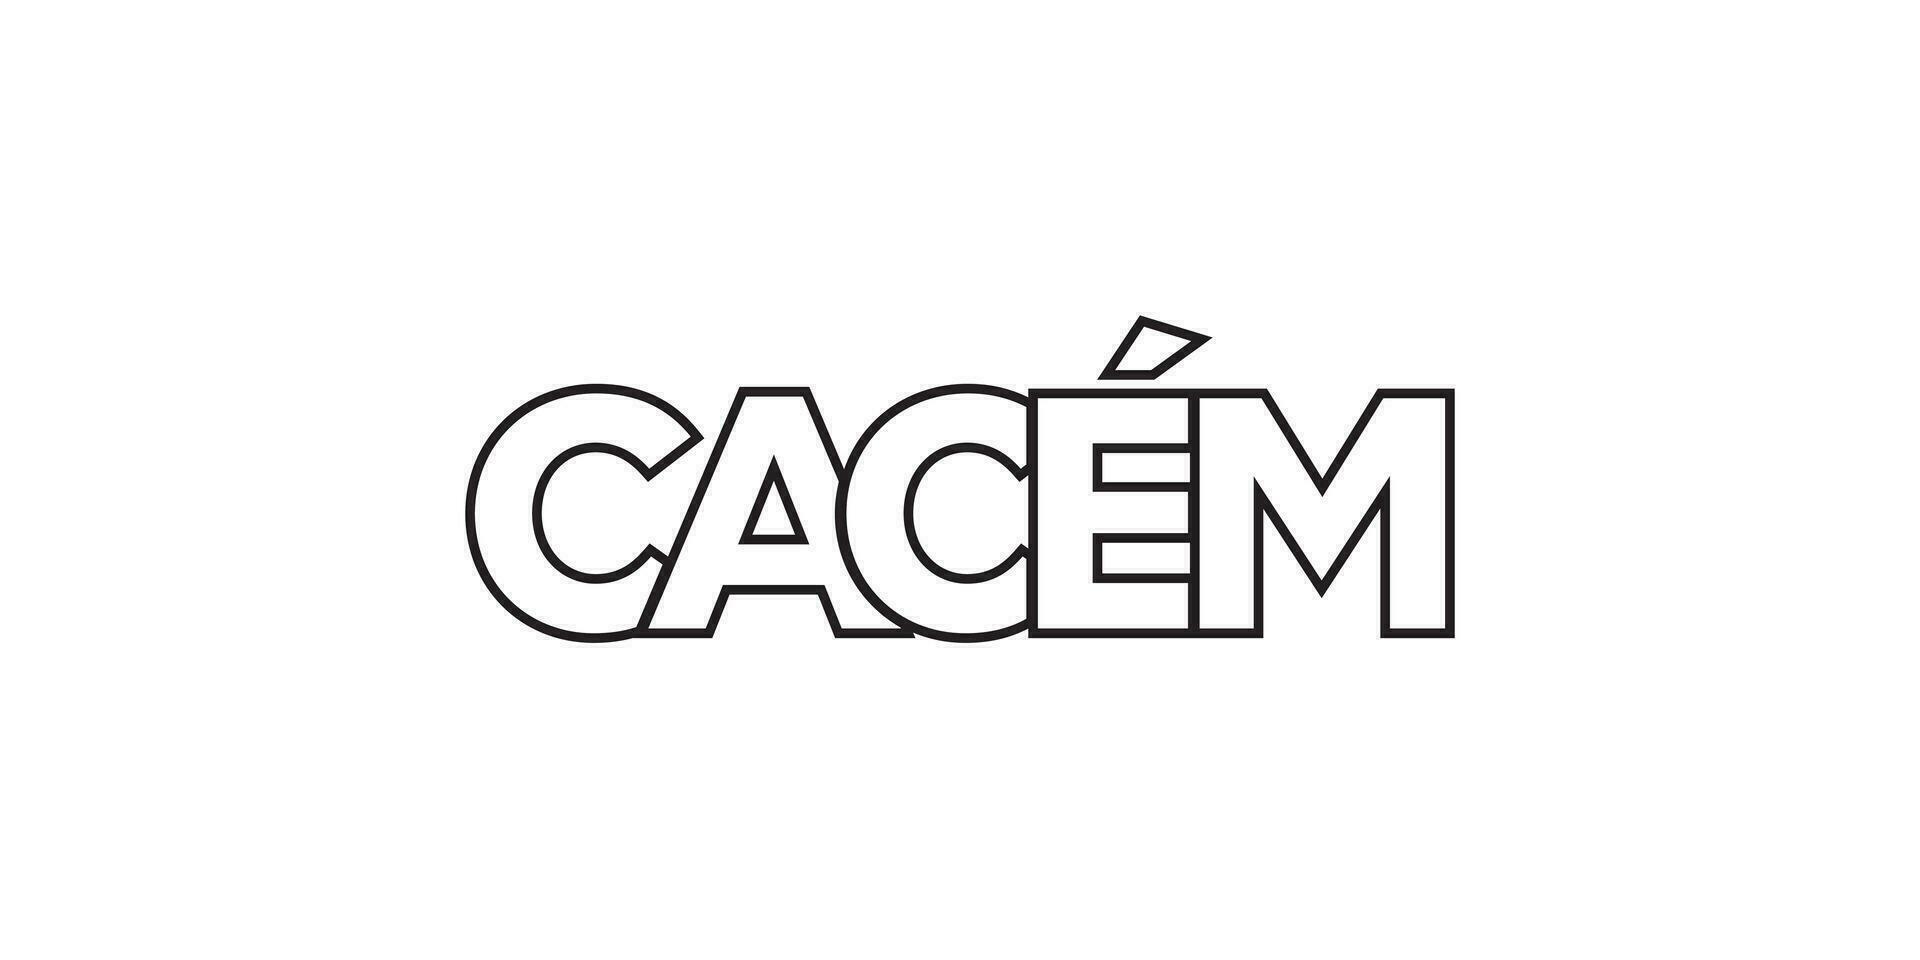 Cacem in the Portugal emblem. The design features a geometric style, vector illustration with bold typography in a modern font. The graphic slogan lettering.